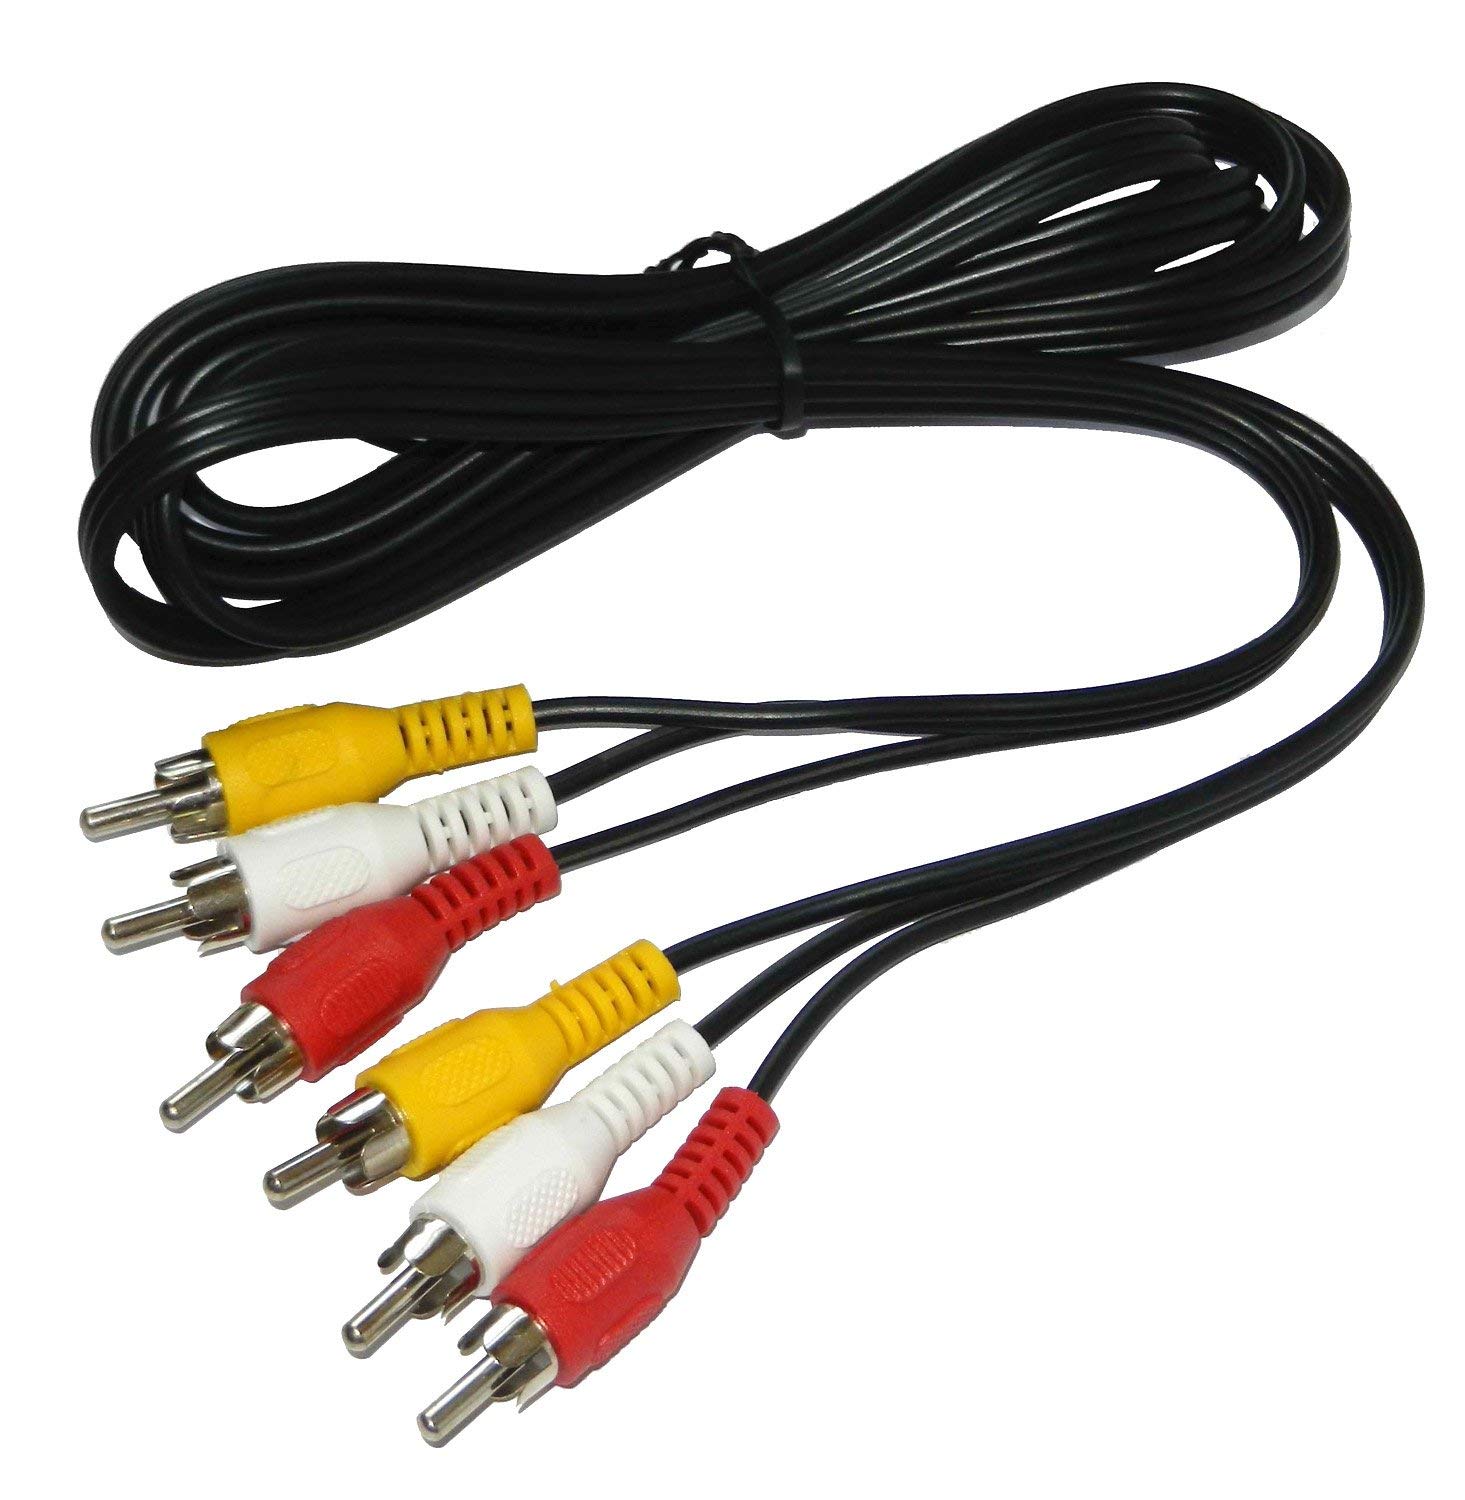 How To Use Stereo Audio Cable For TV